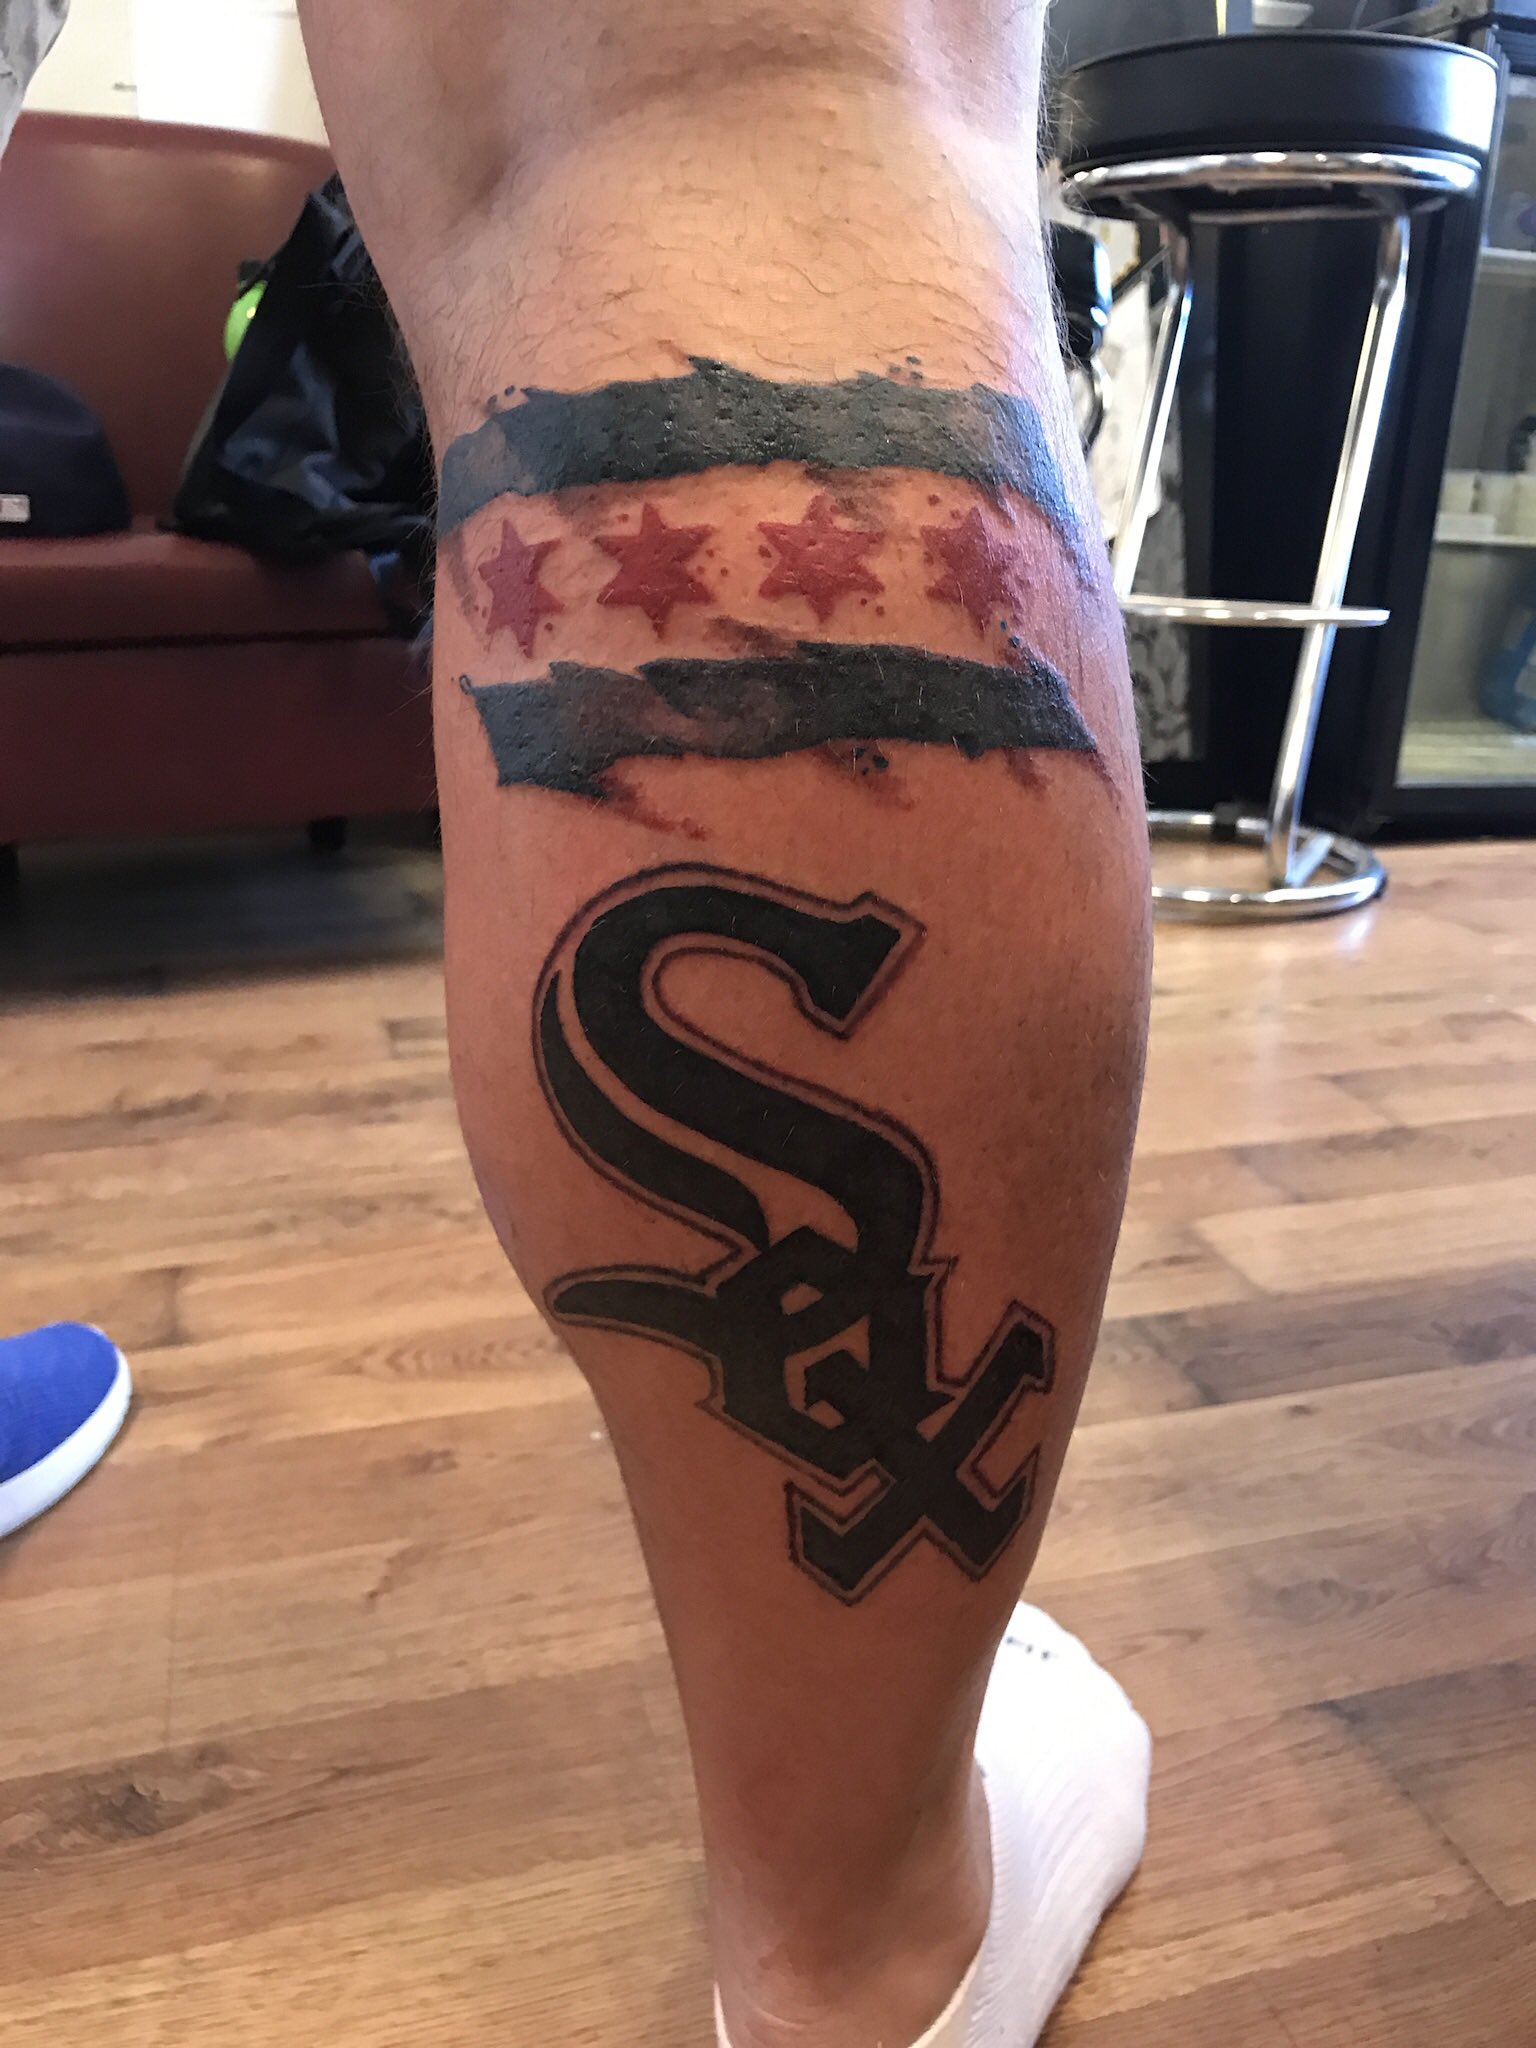 Colin Dowding on X: "@whitesox Gutted I can't win this as don't live in US as could do with a tattoo to accompany this... https://t.co/nmIk3IHjLP" / X